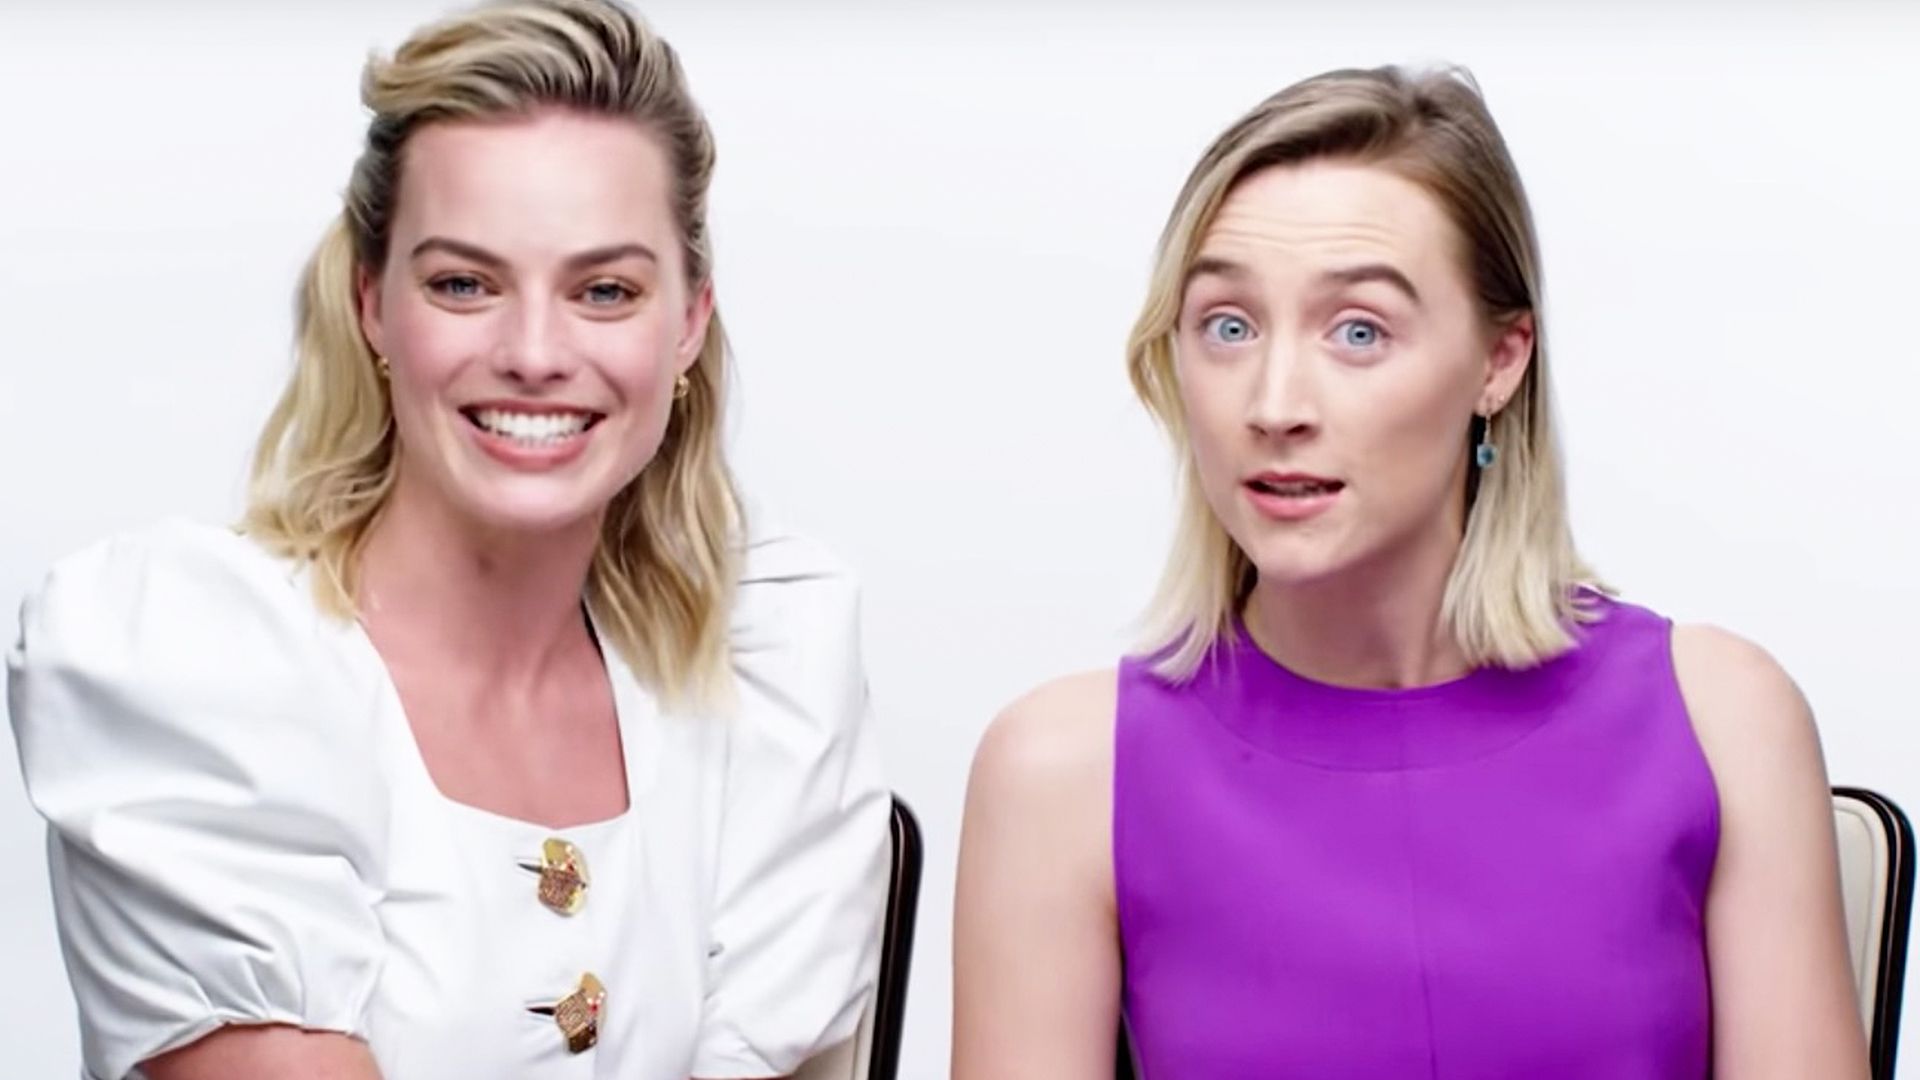 Margot Robbie And Saoirse Ronan Answer Your Burning Questions